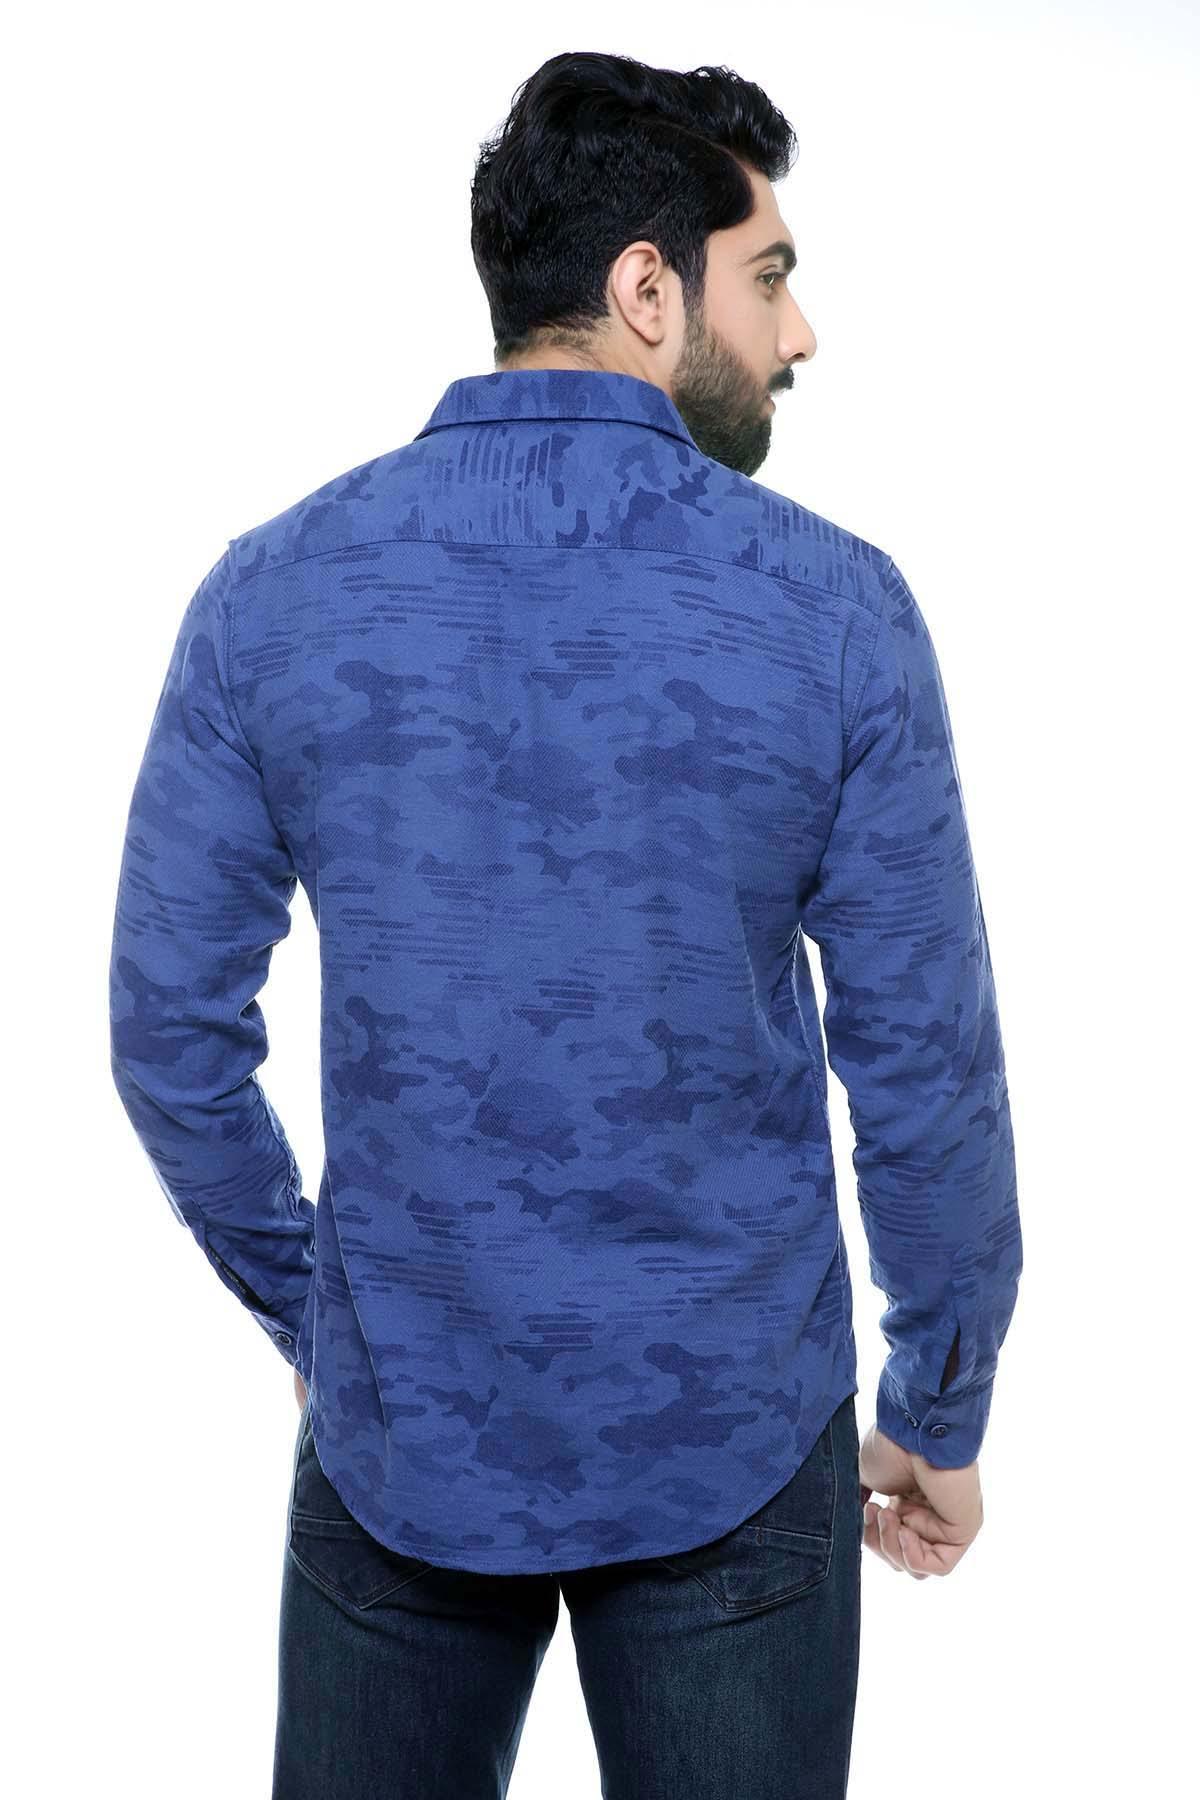 CASUAL SHIRT FULL SLEEVE BLUE  SLIM FIT at Charcoal Clothing